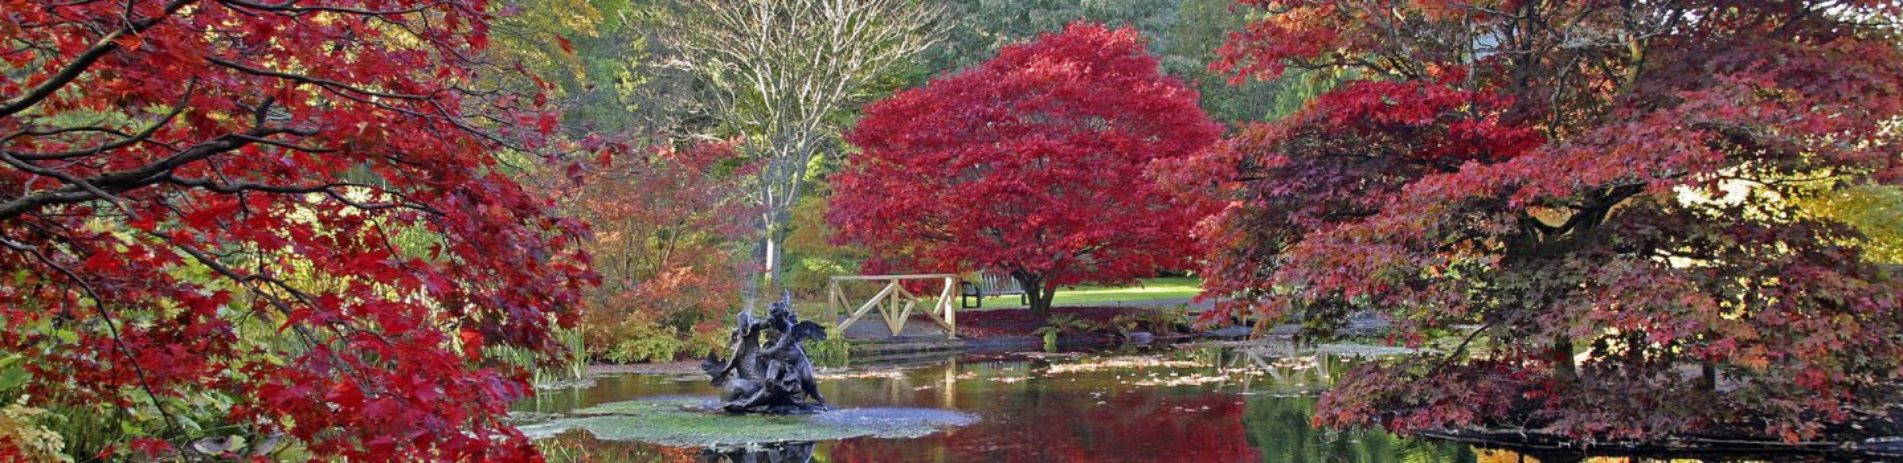 benmore-botanic-gardens-pond-surrounded-by-fiery-red-acer-trees-in-autumn-season